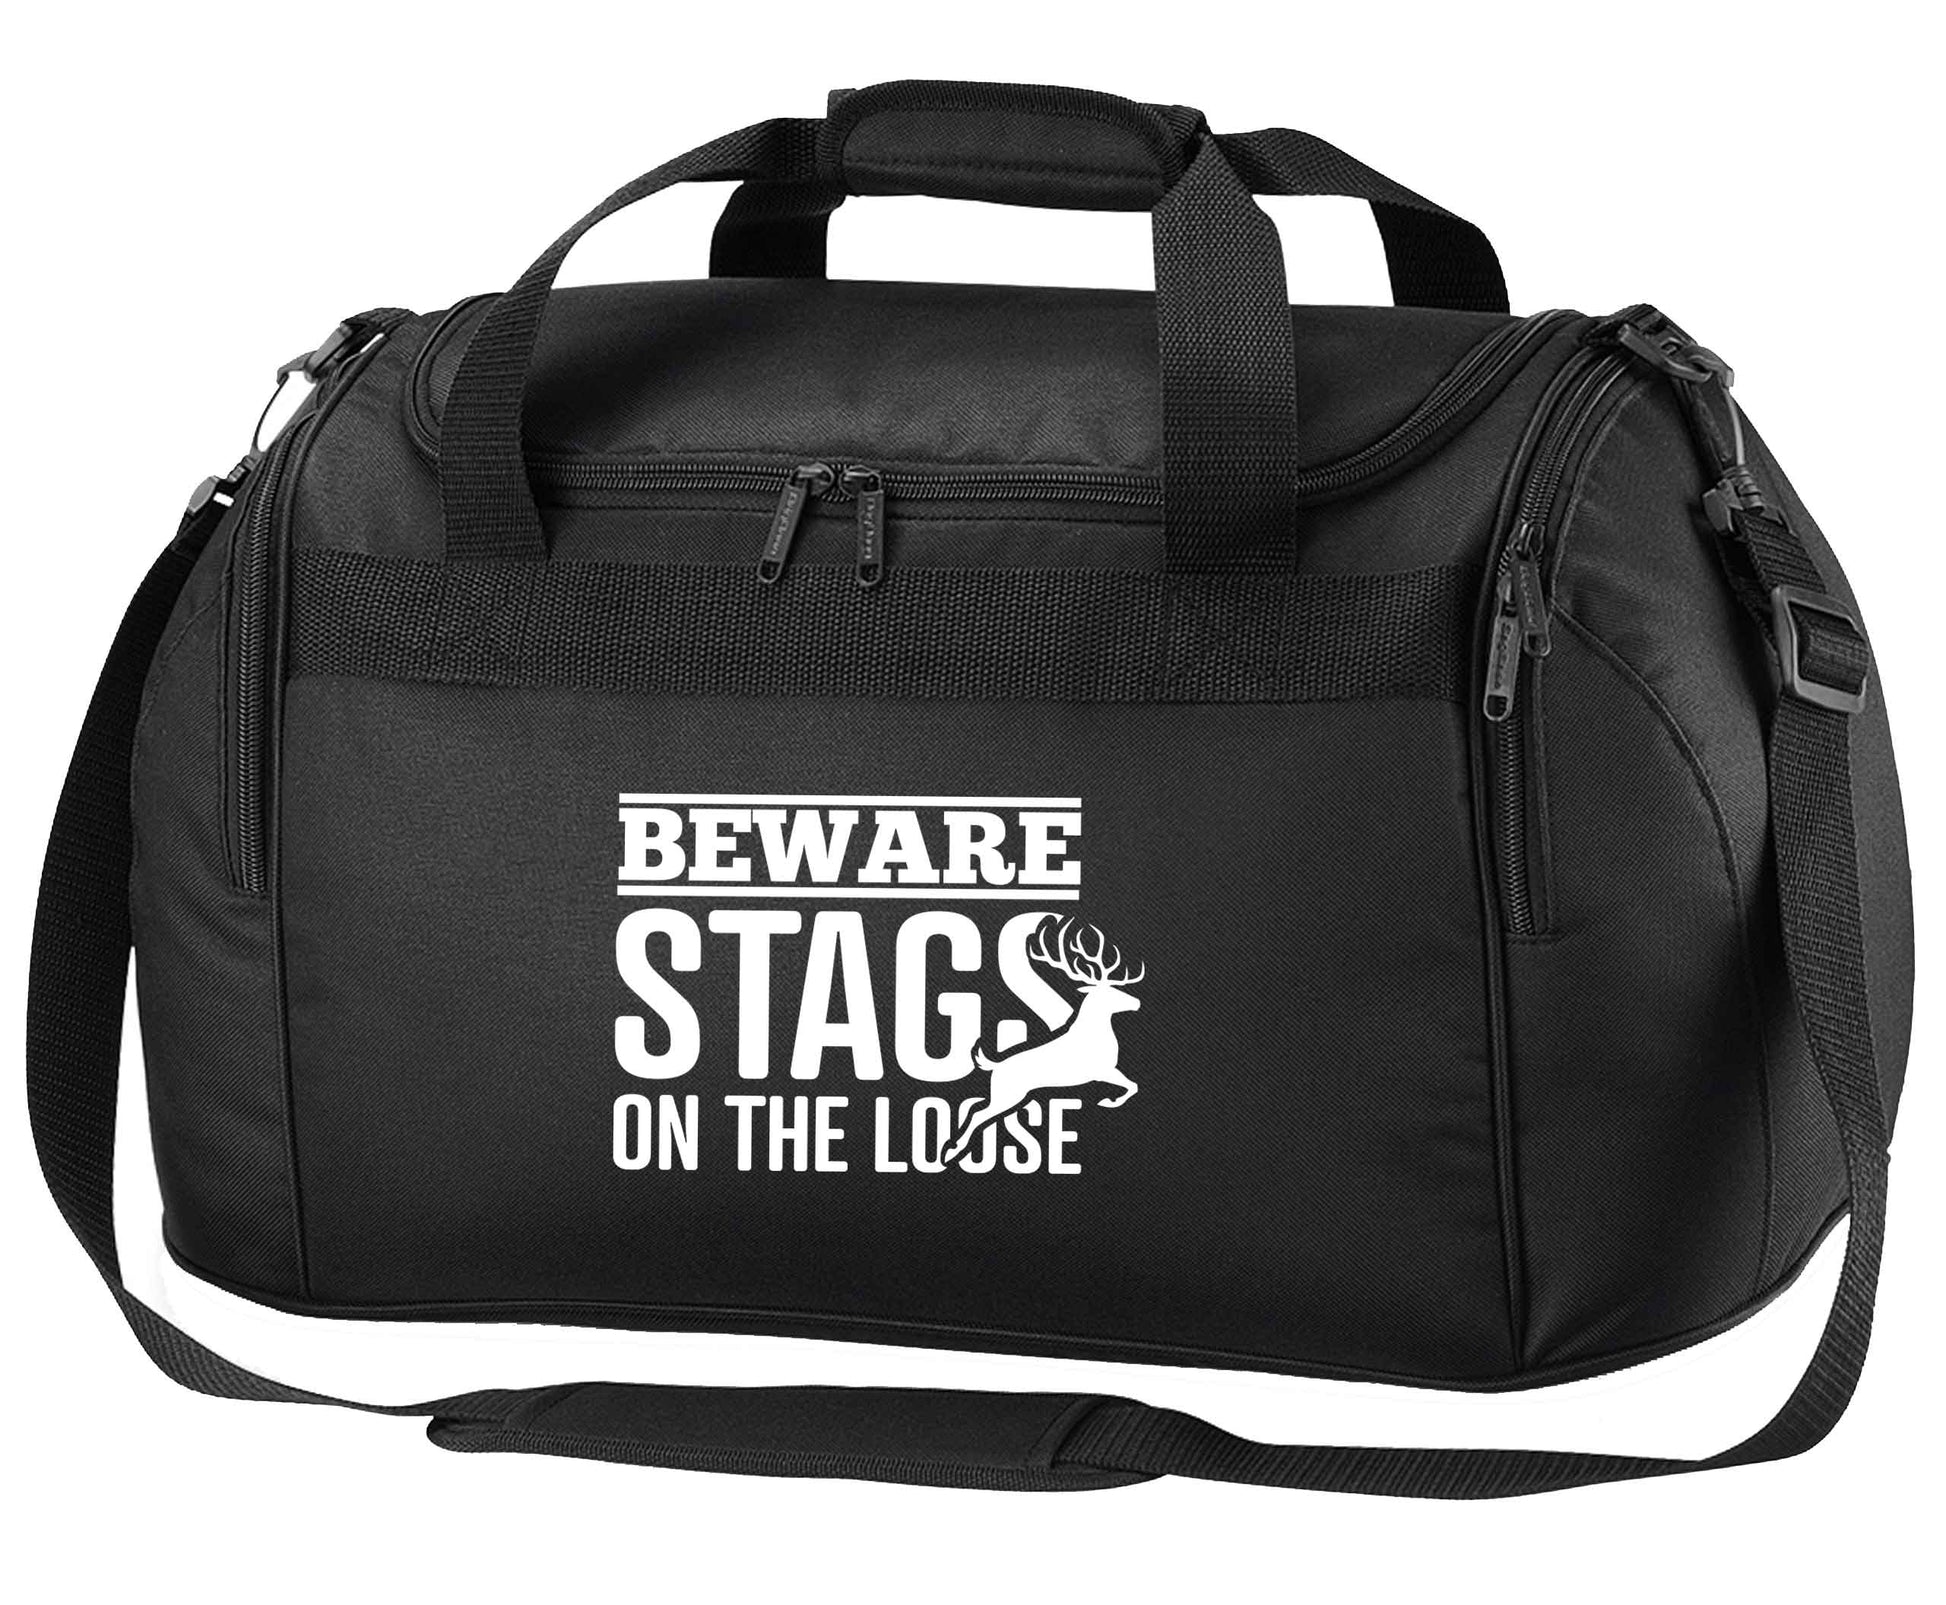 Beware stags on the loose black holdall / duffel bag